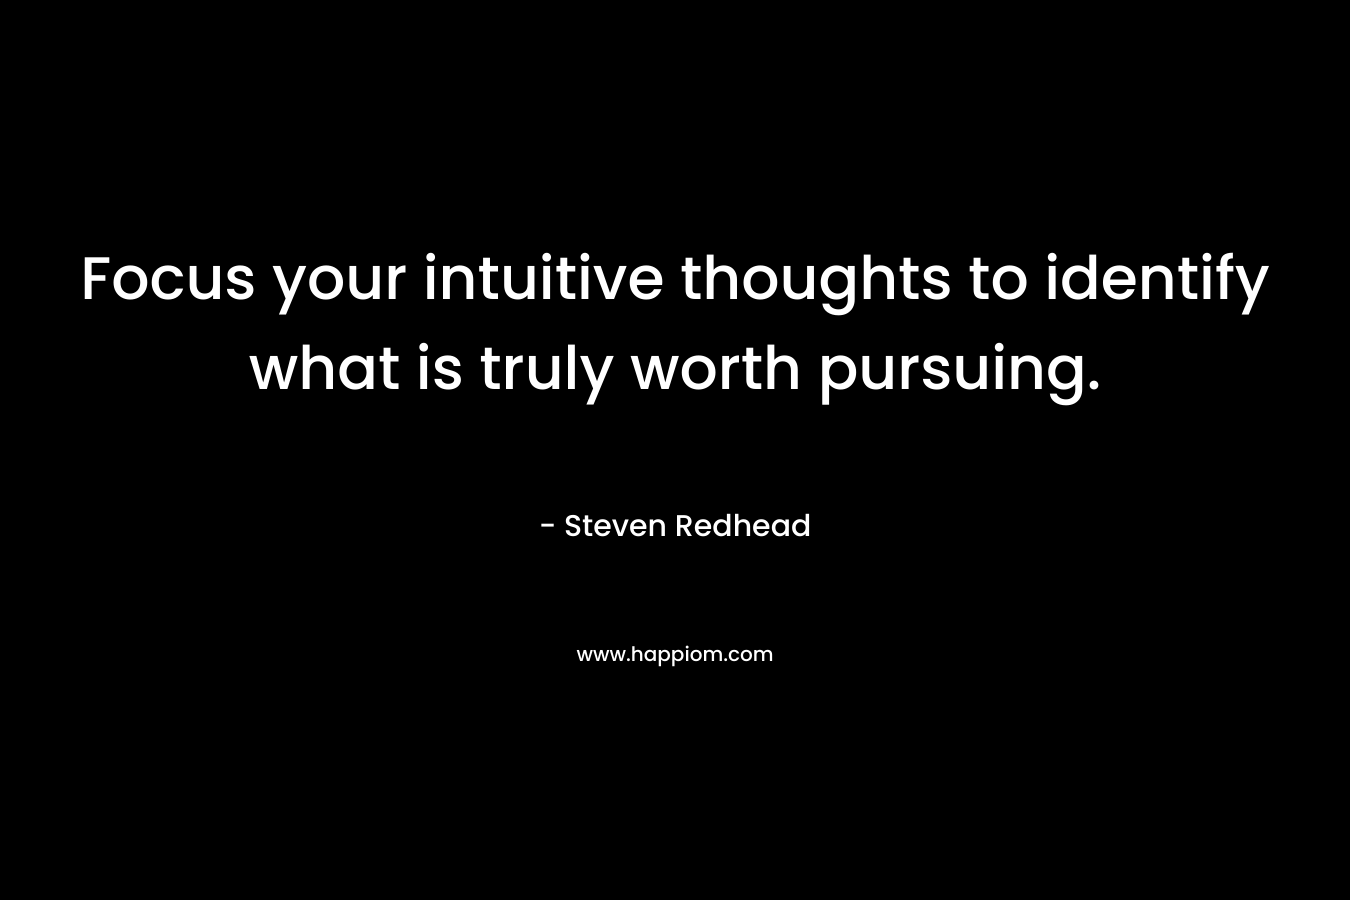 Focus your intuitive thoughts to identify what is truly worth pursuing. – Steven Redhead